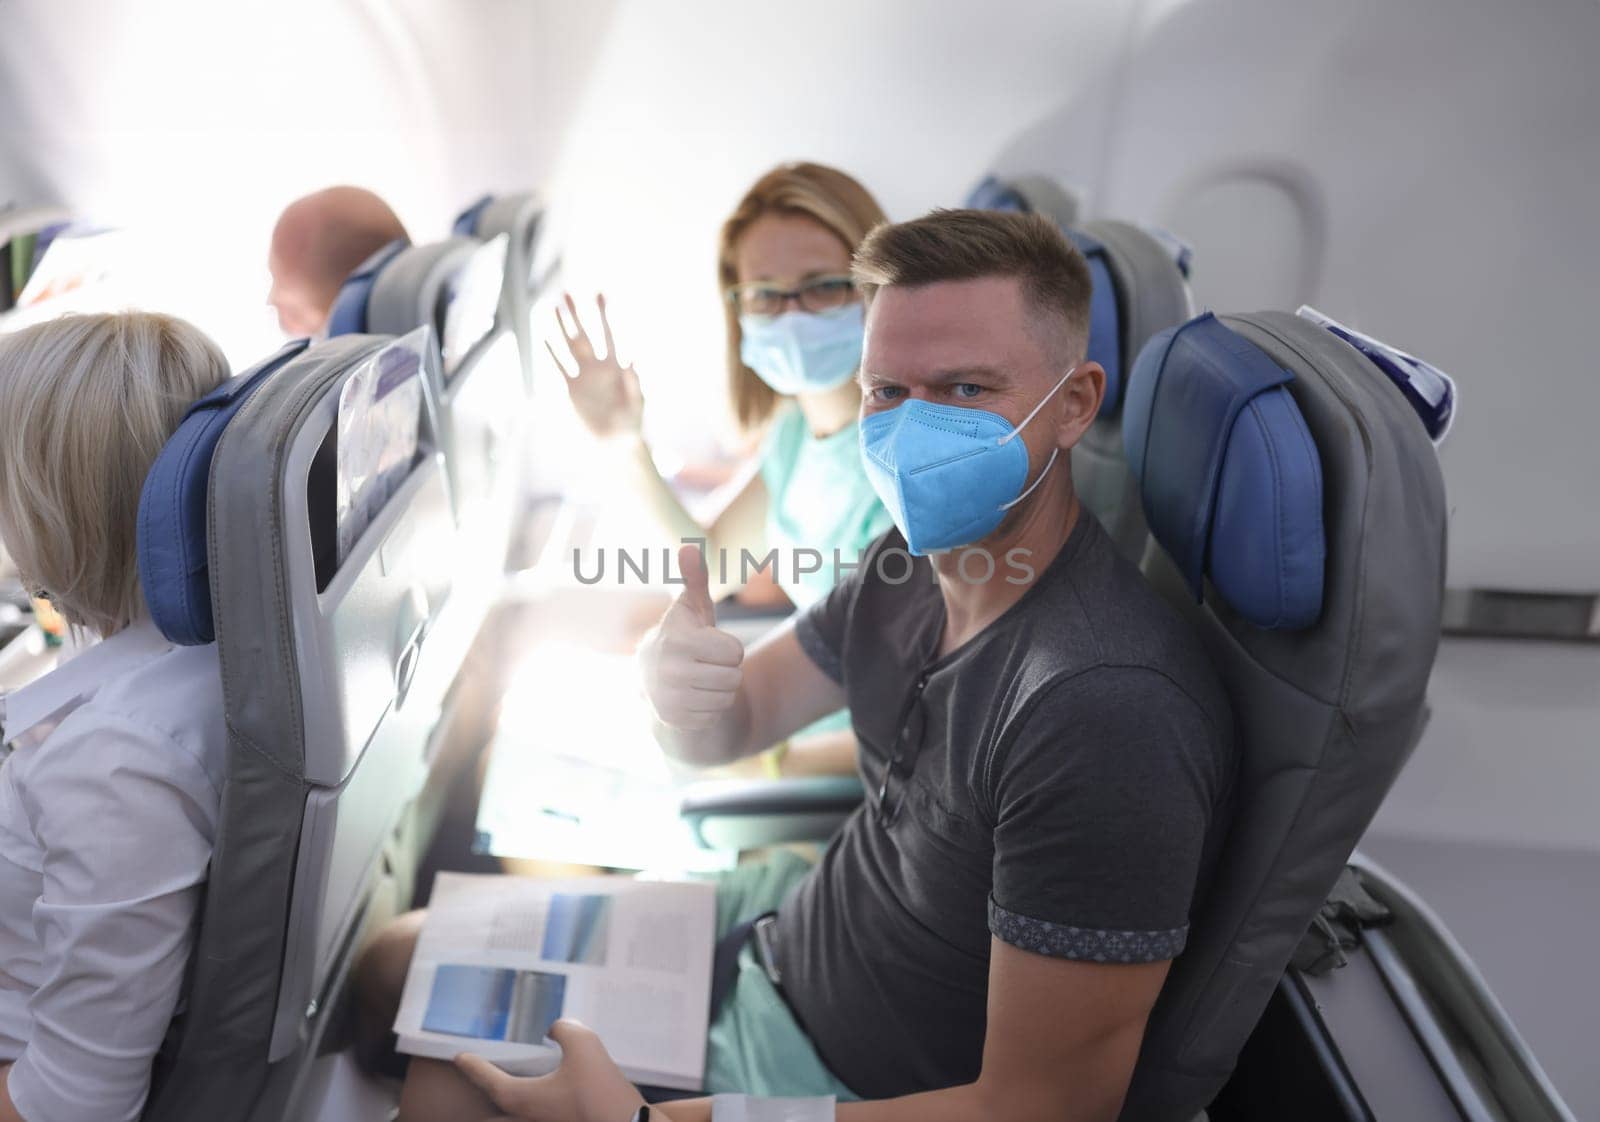 Man and woman in medical protective masks on plane. Safe flying in coronavirus pandemic concept